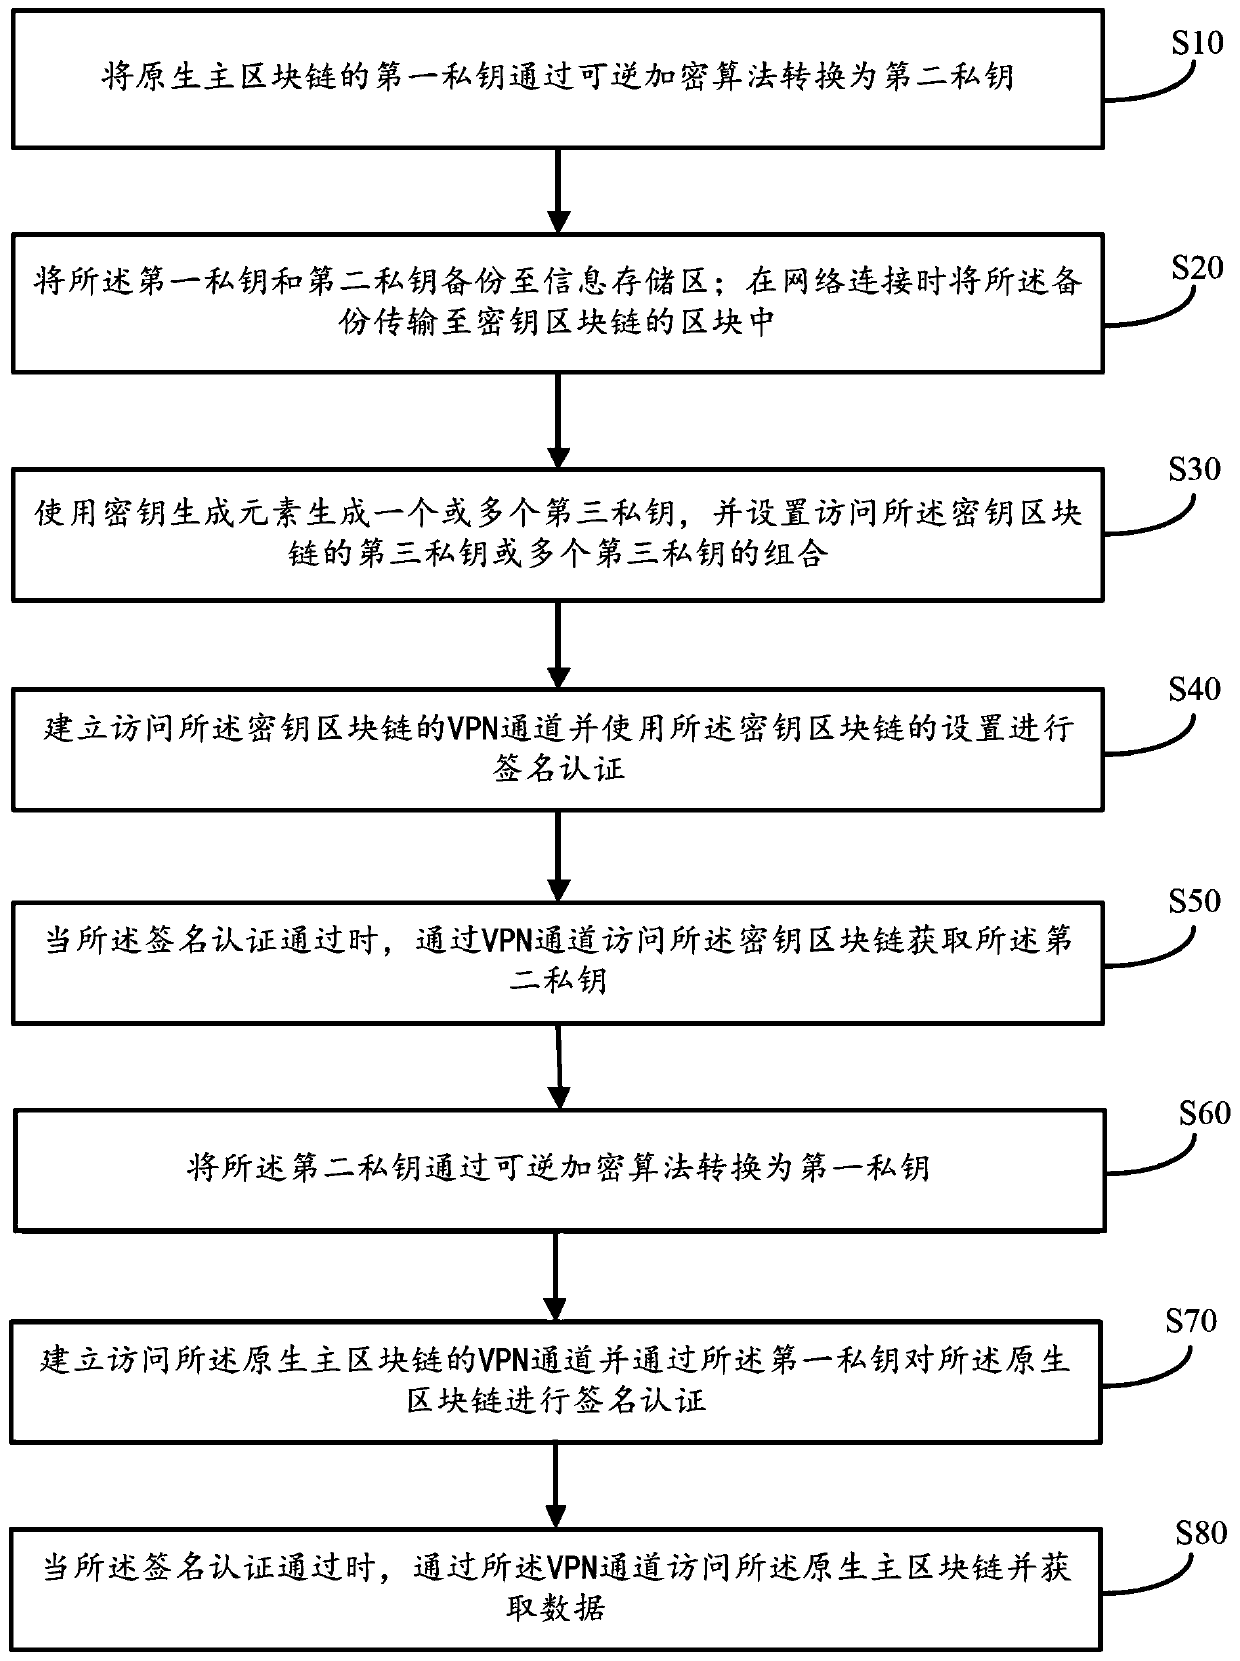 Block chain cross-chain key security access method and device and storage medium